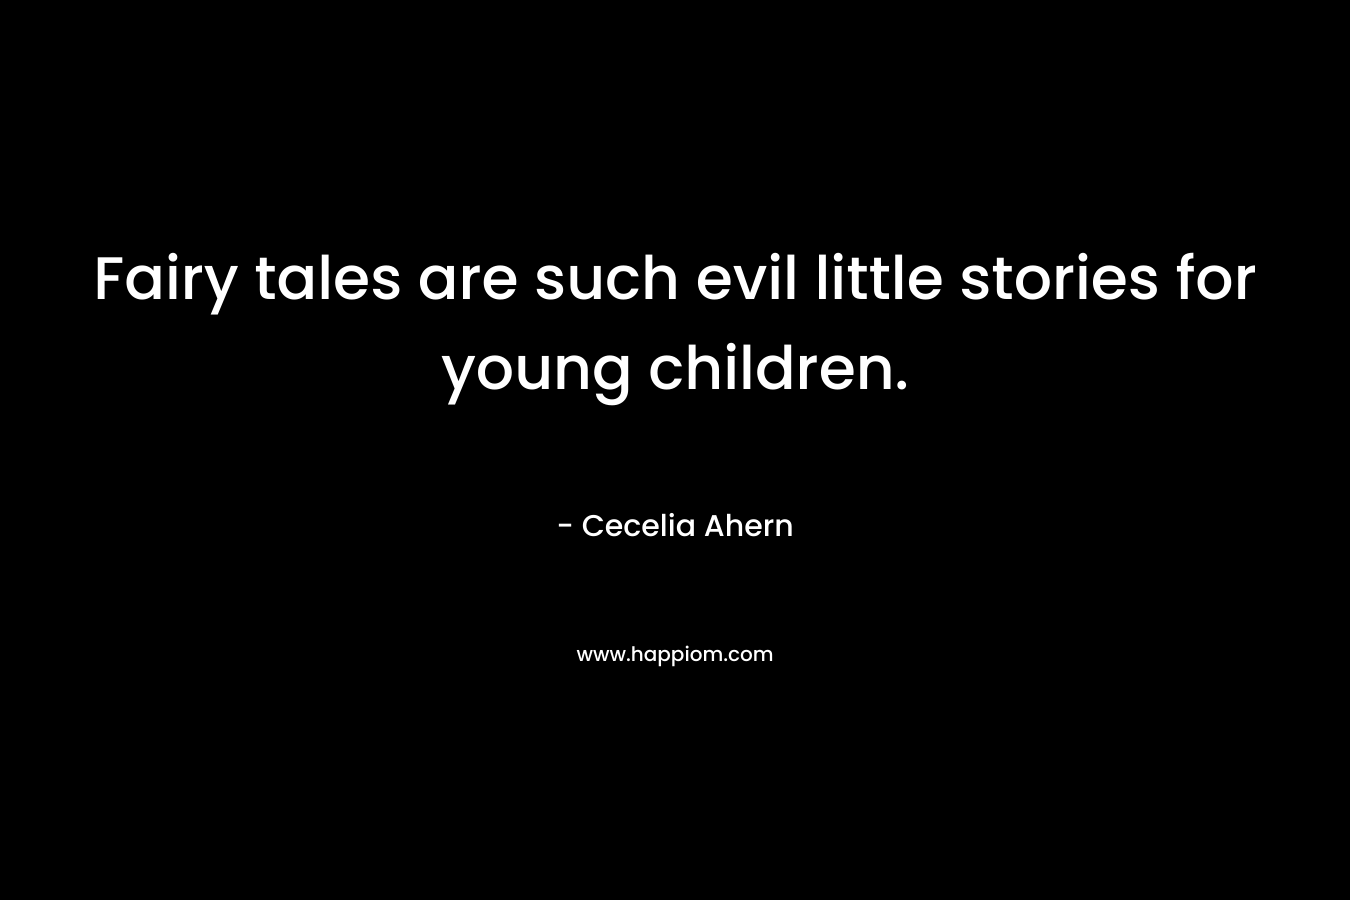 Fairy tales are such evil little stories for young children. – Cecelia Ahern